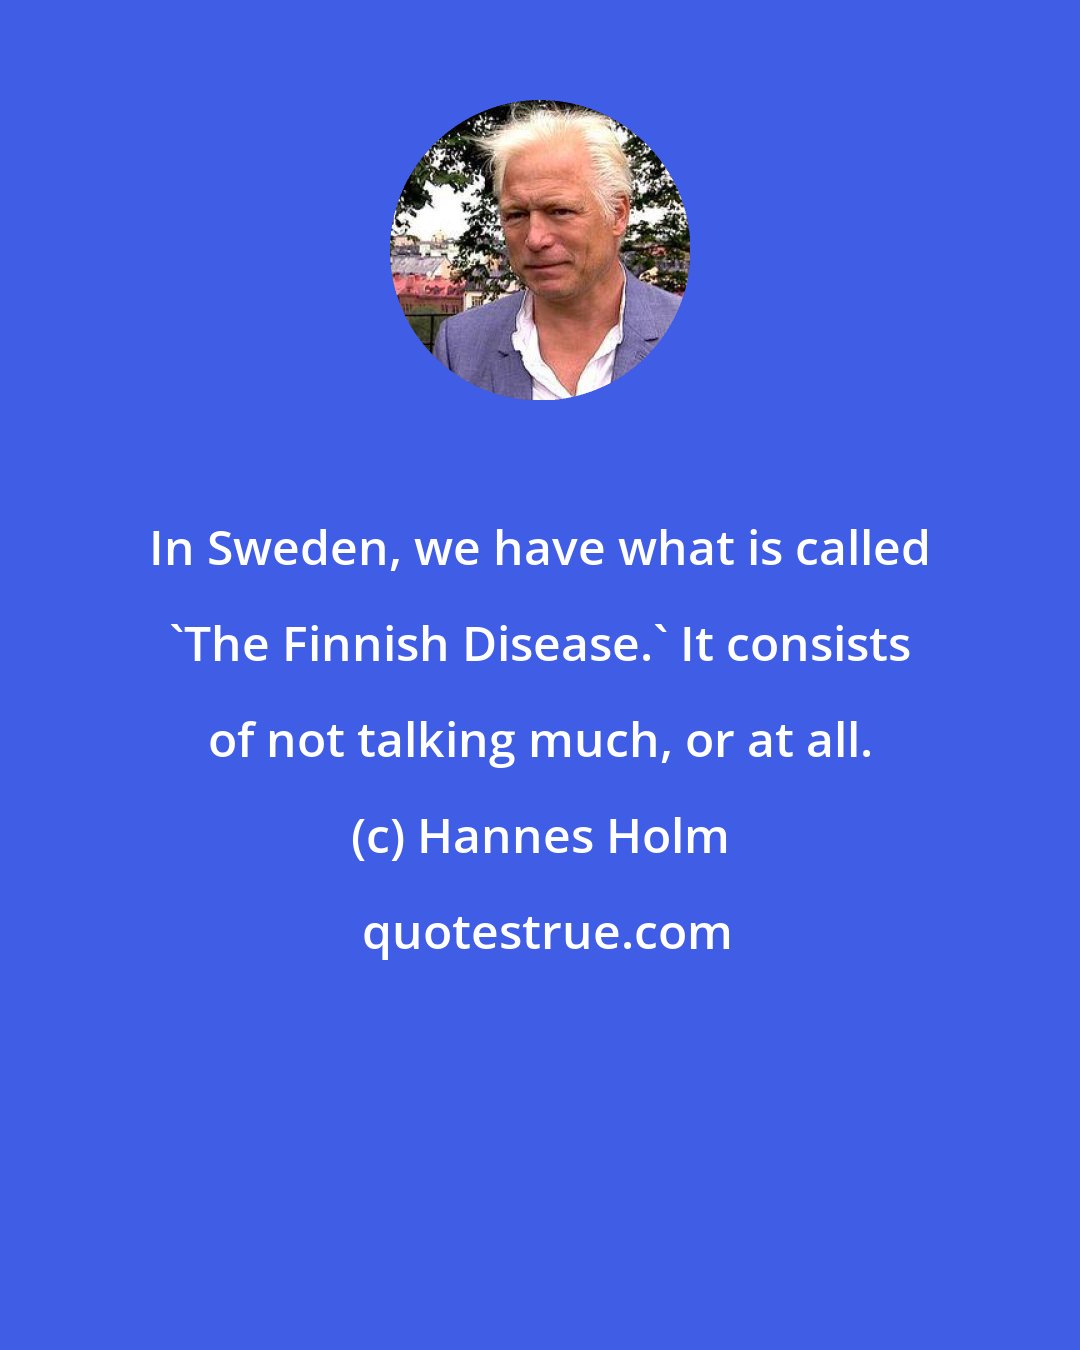 Hannes Holm: In Sweden, we have what is called 'The Finnish Disease.' It consists of not talking much, or at all.